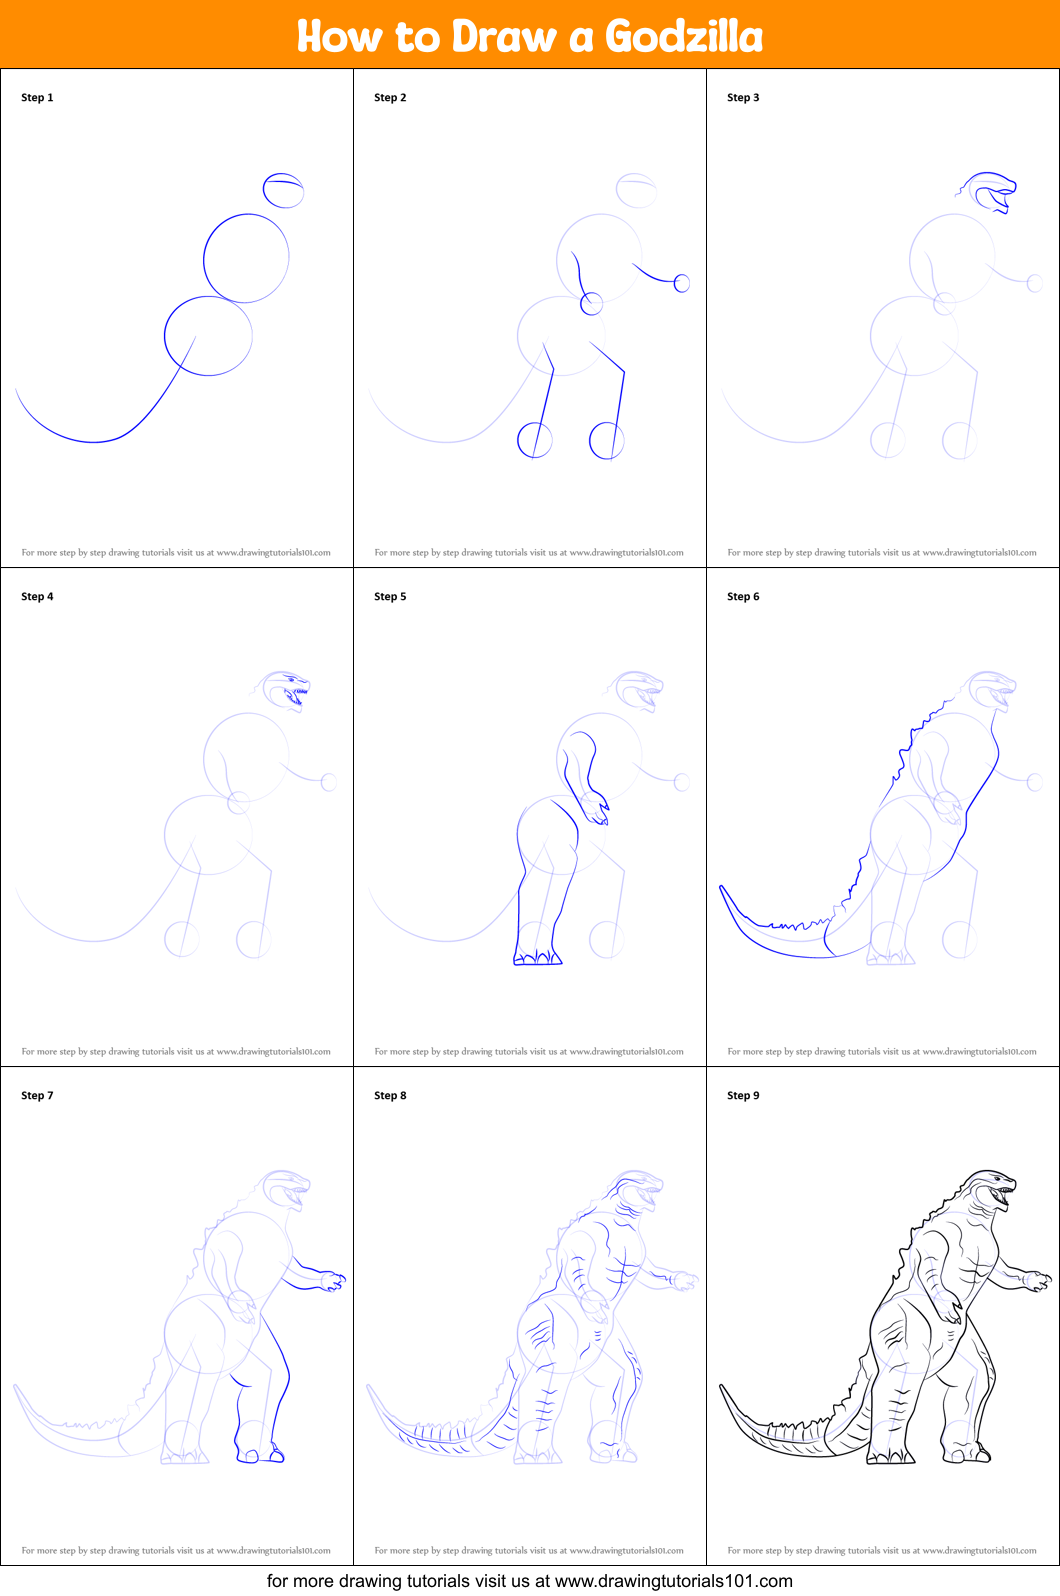 How to Draw a Godzilla printable step by step drawing sheet